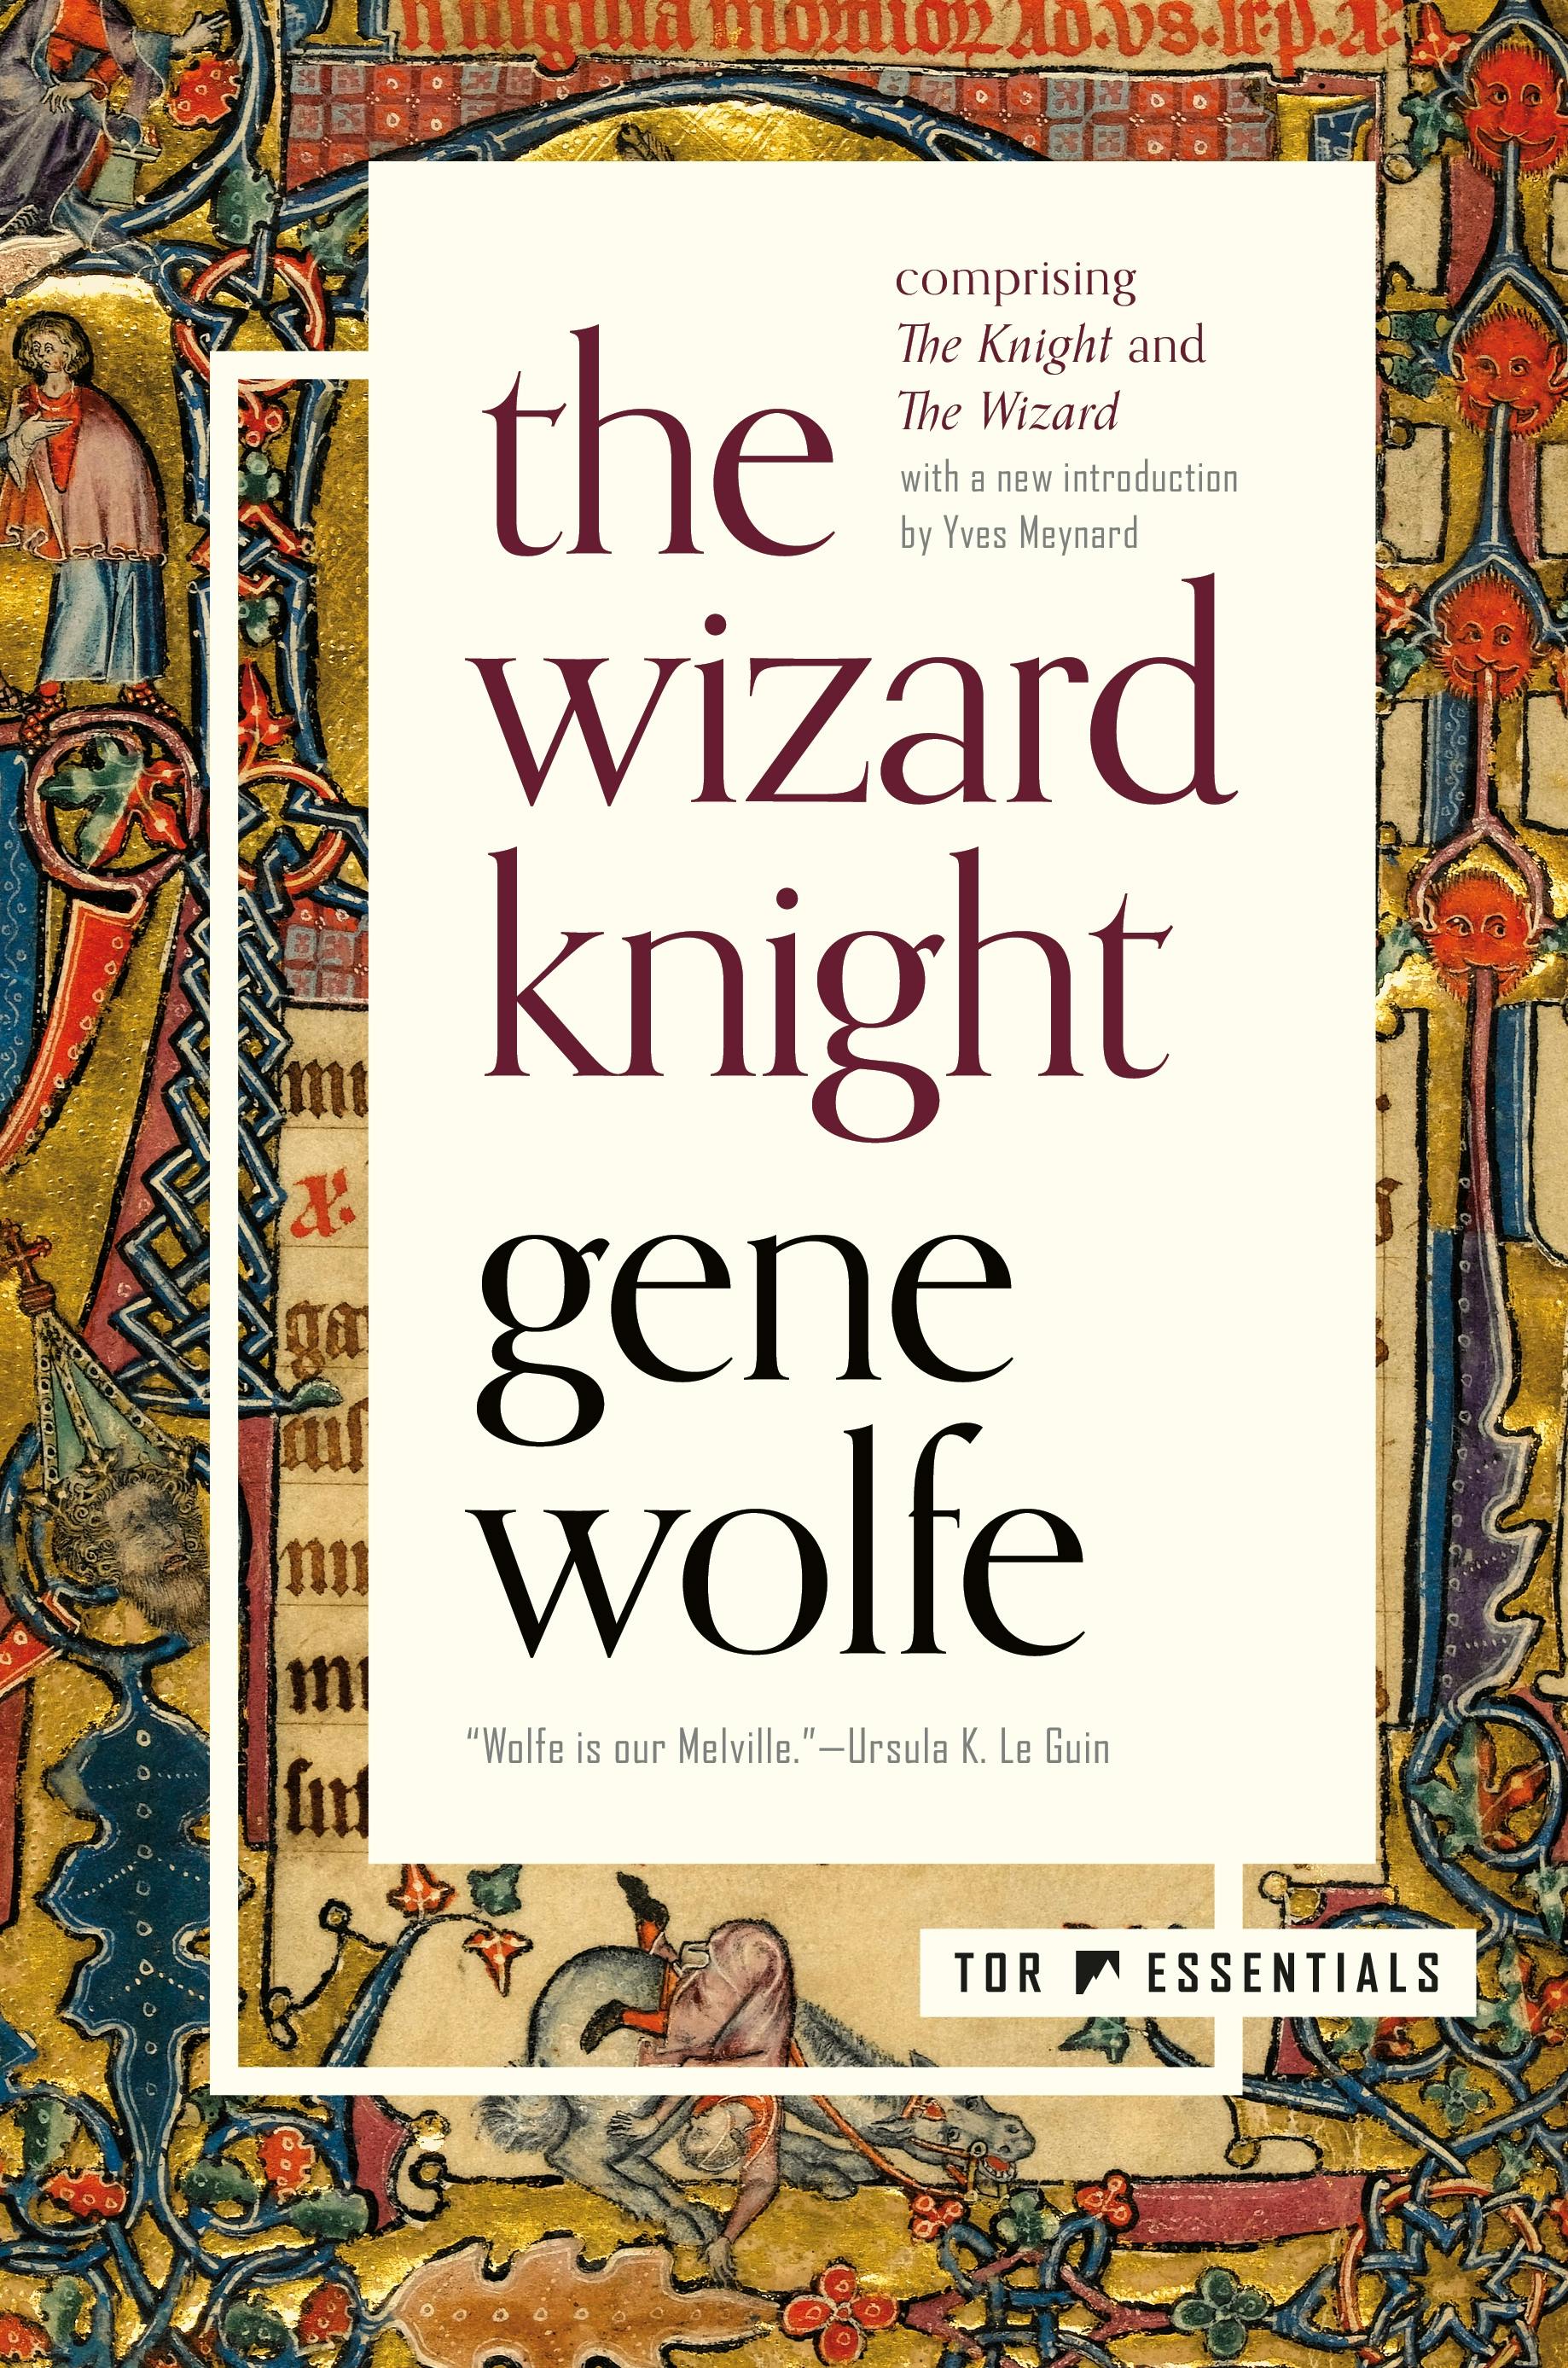 Cover for the book titled as: The Wizard Knight